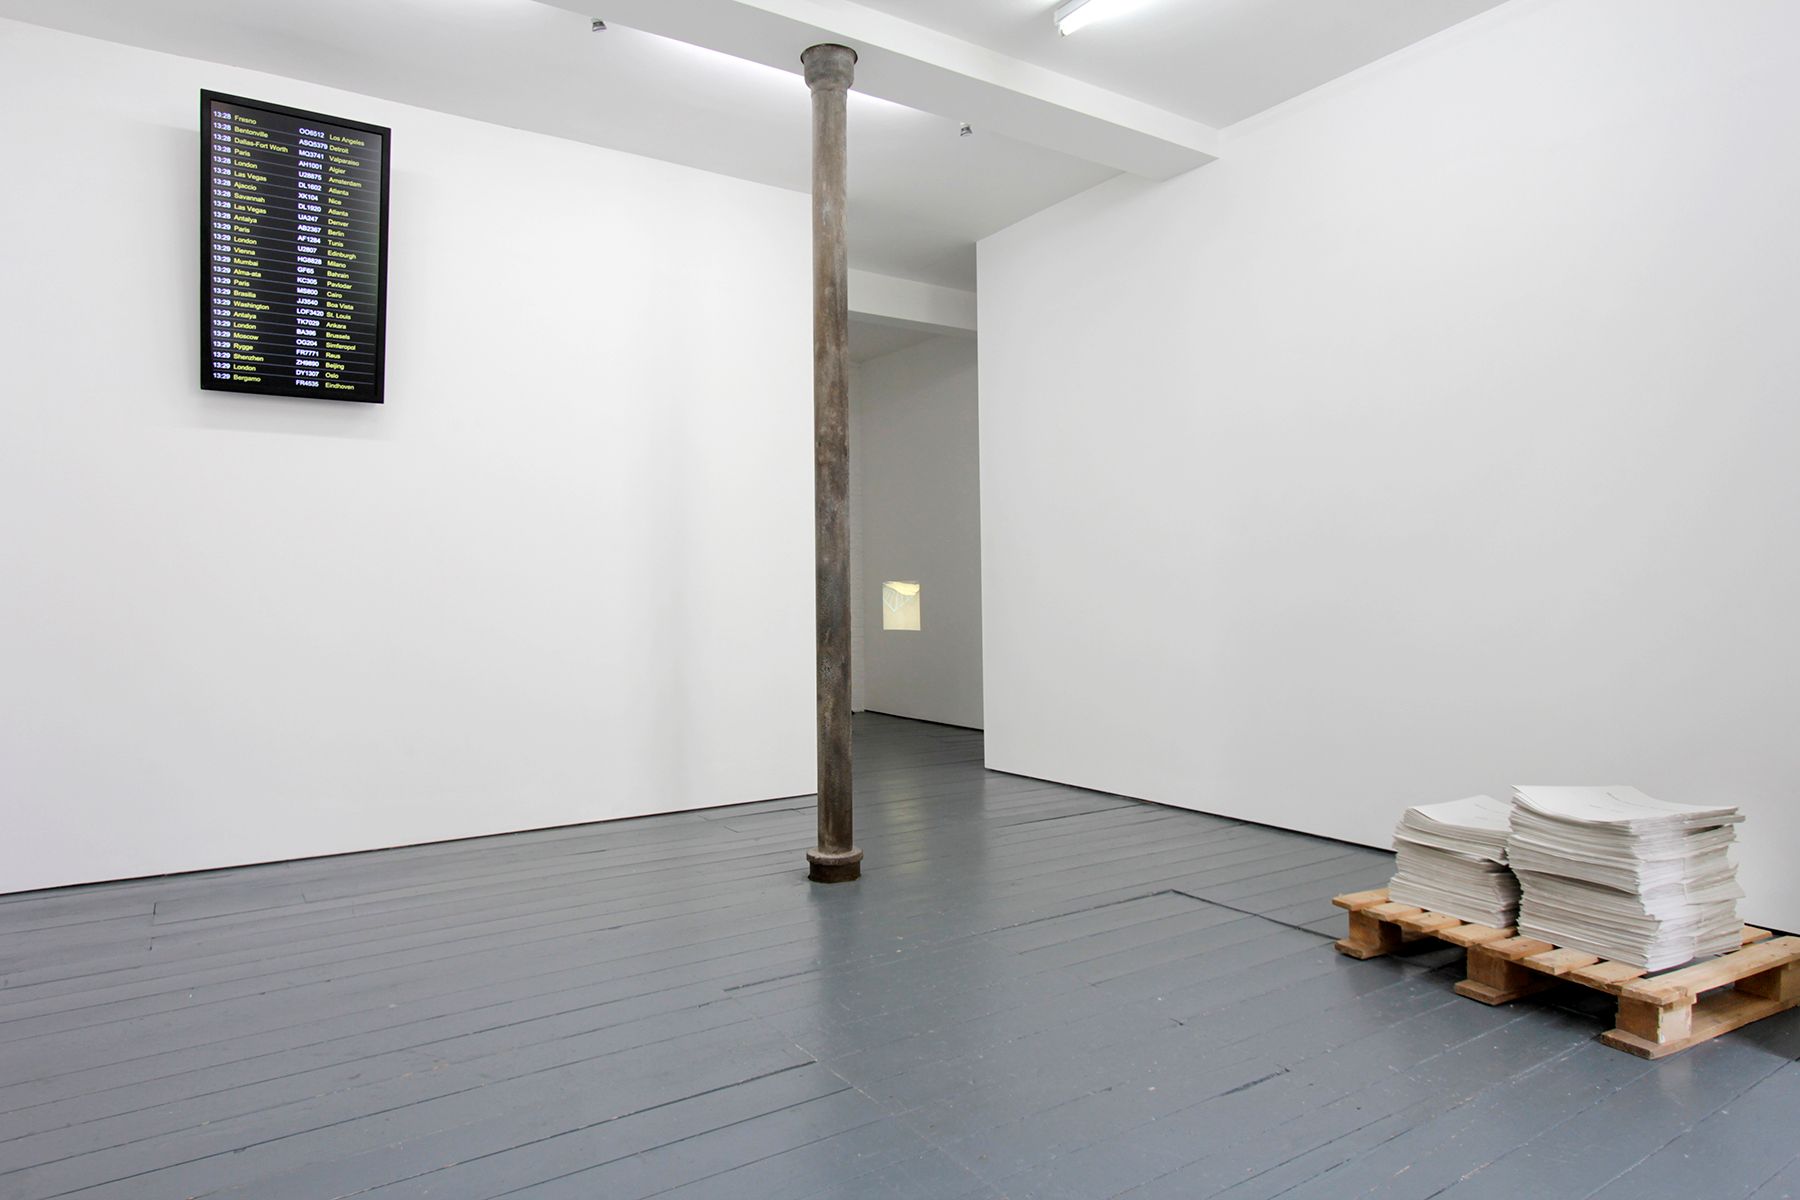 Departure of All installation view 2013